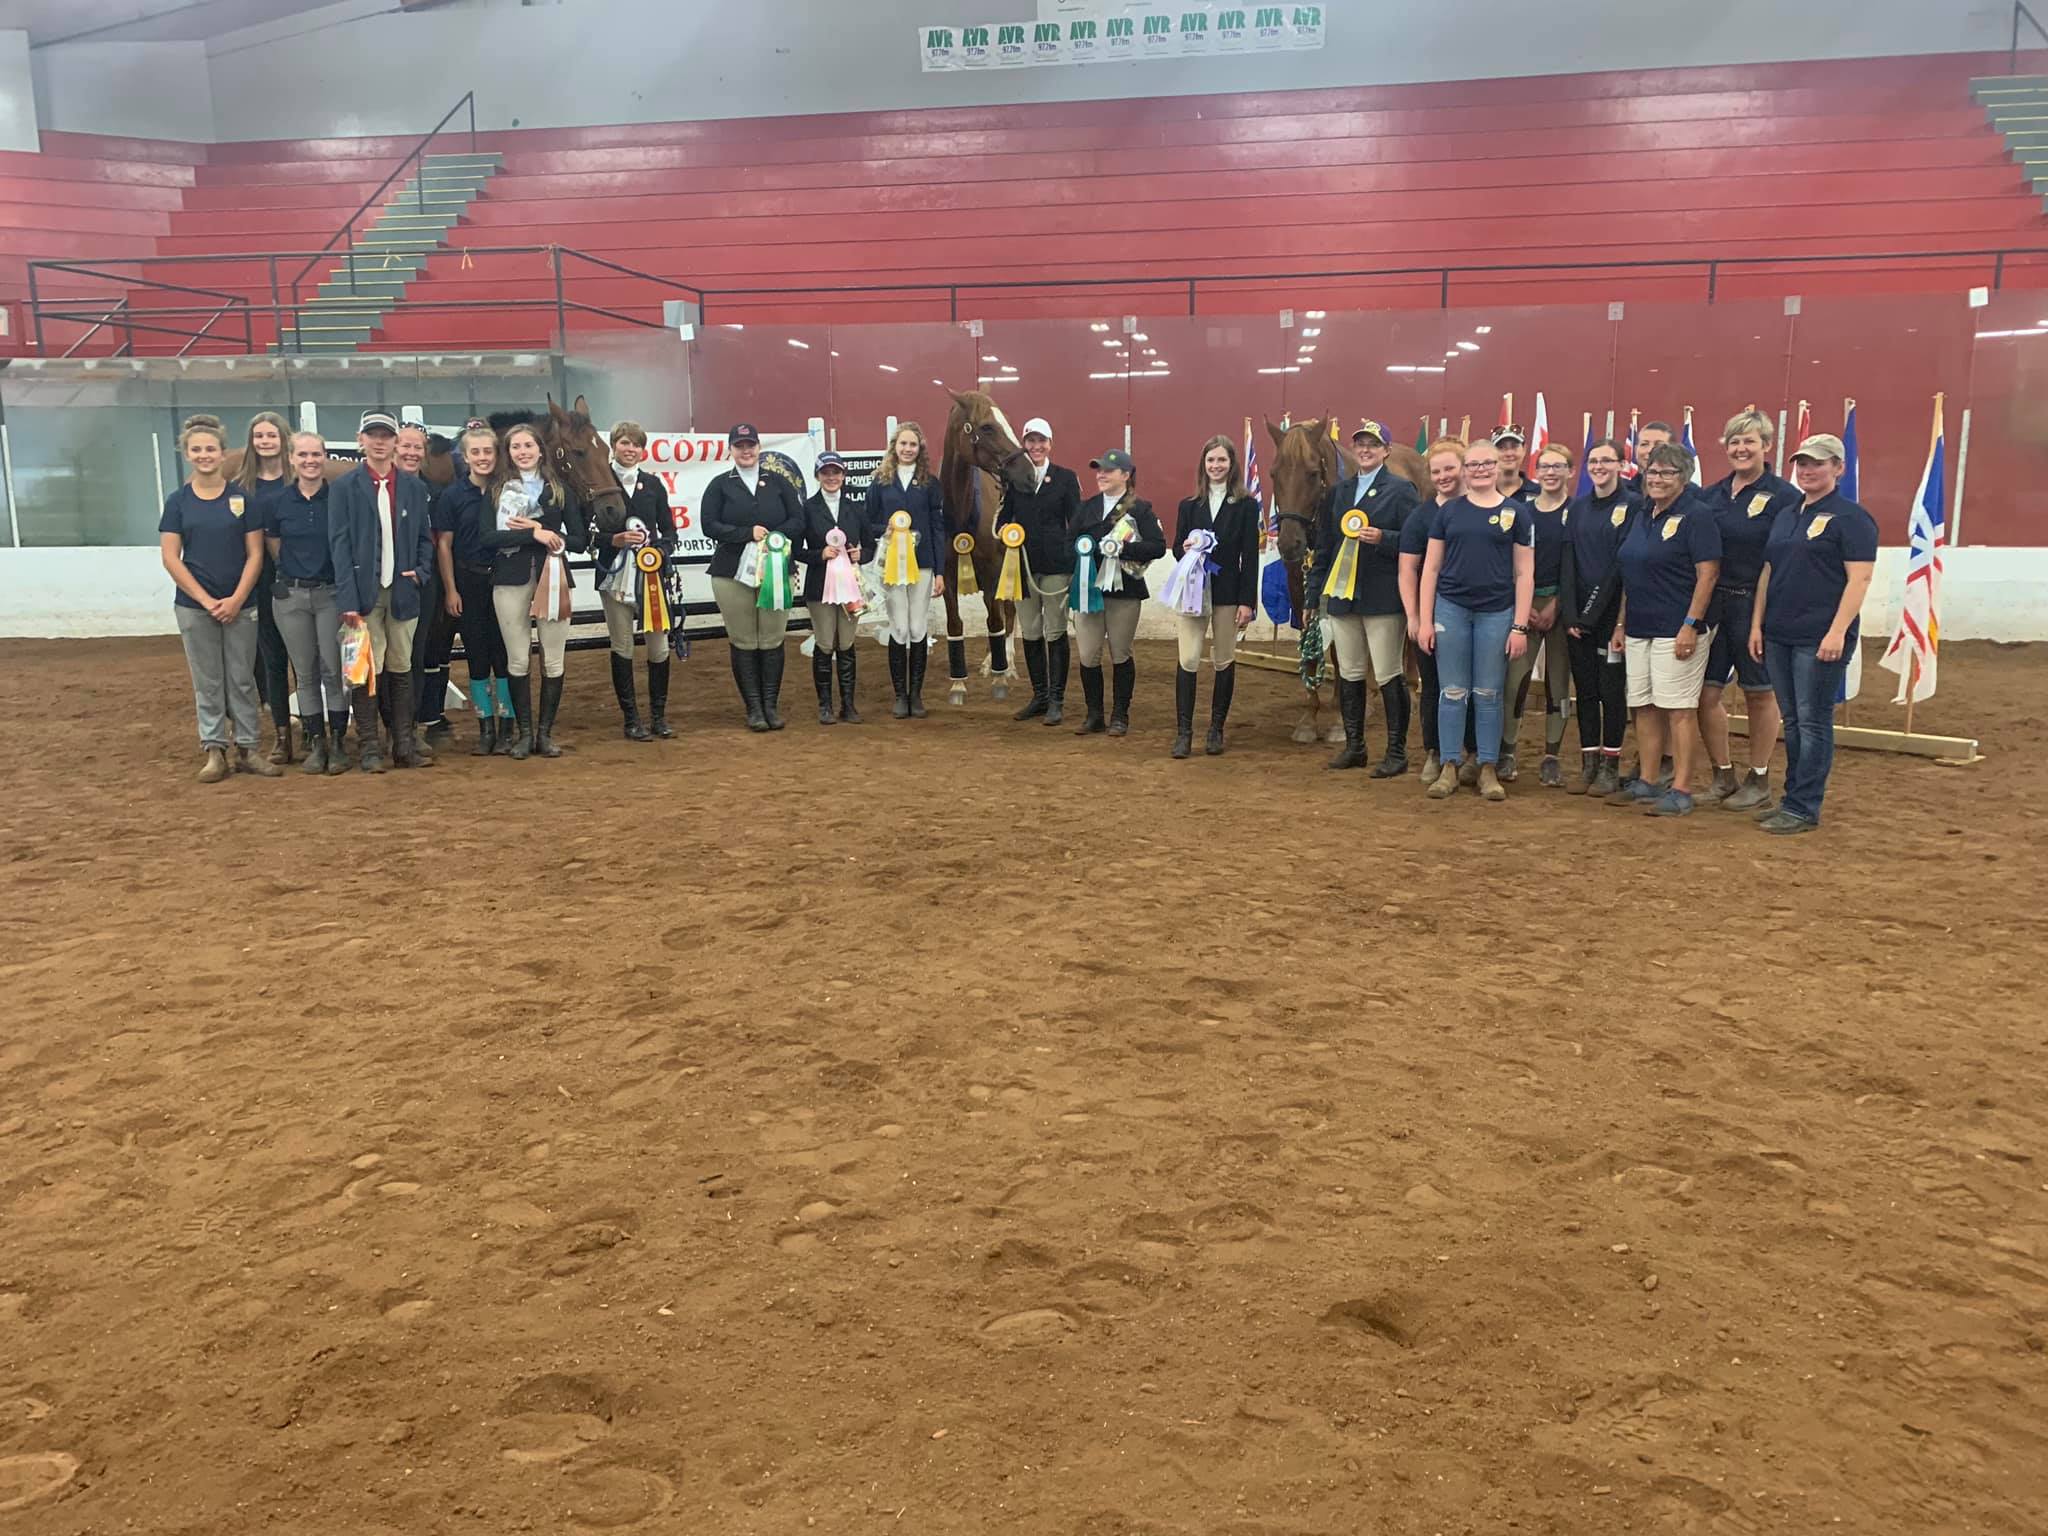 2019 National Show Jumping